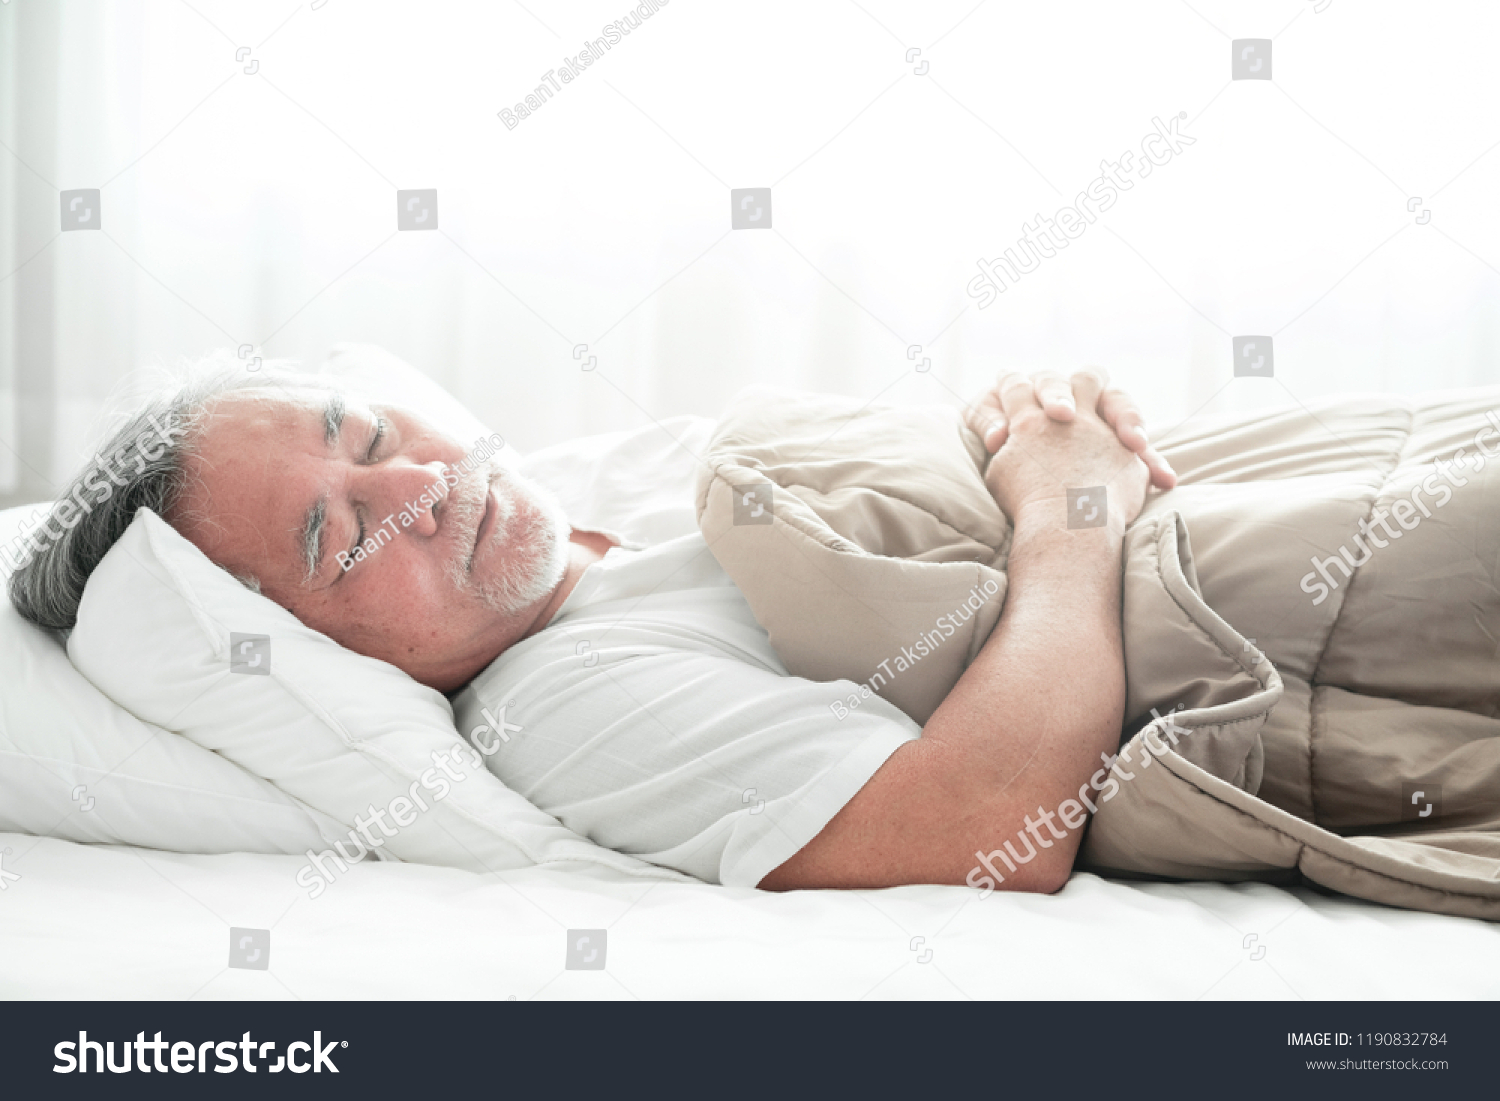 Senior man sleeping in bed. Old asian man sleeping comfortably in bed with curtain open. Senior lifesyle concept. #1190832784